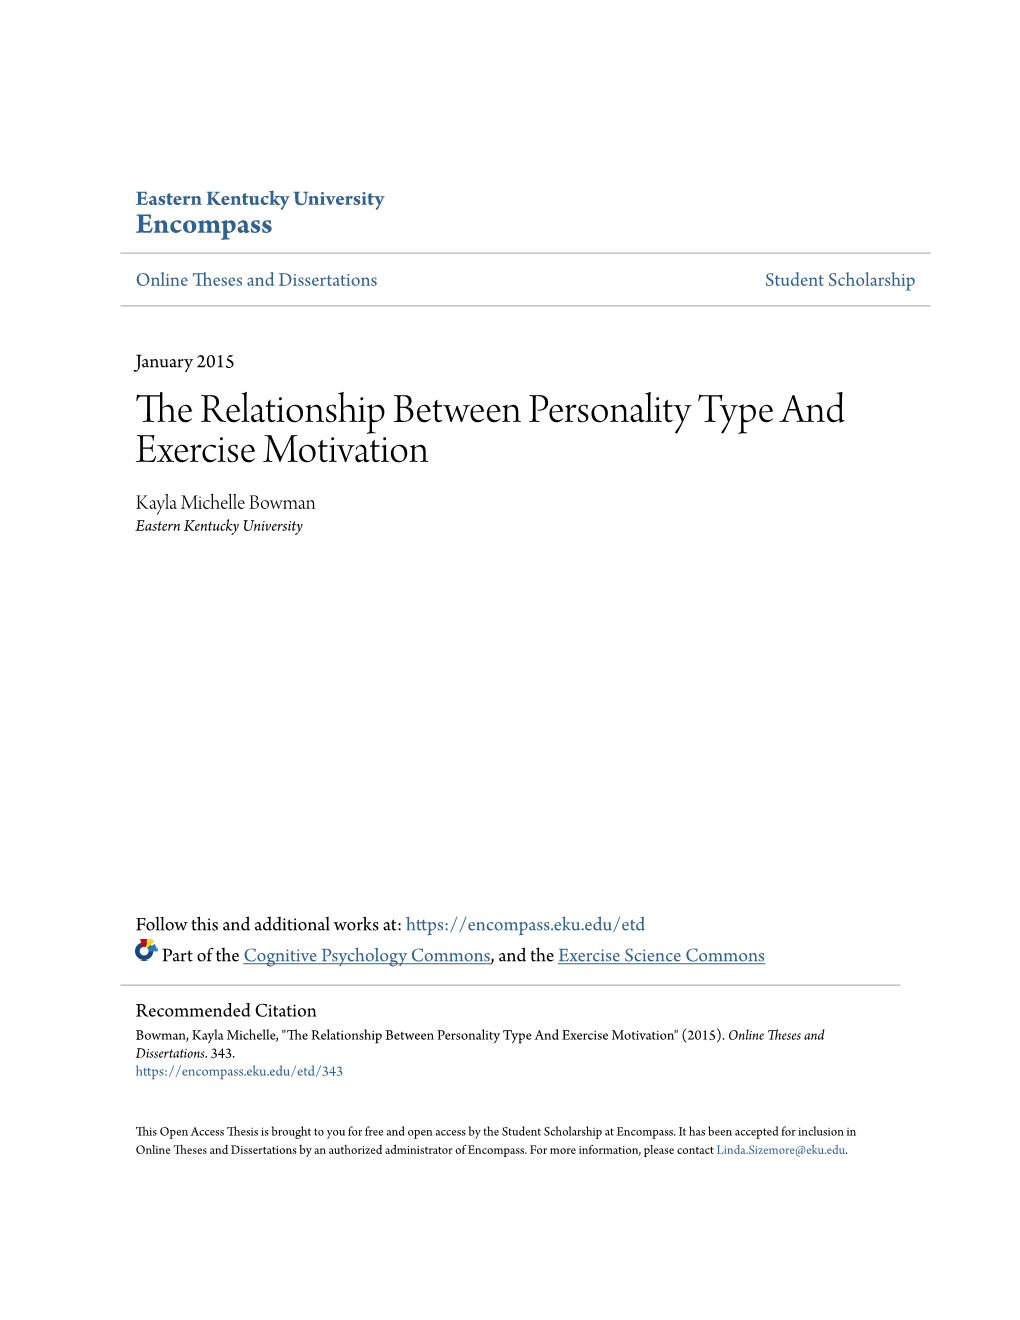 The Relationship Between Personality Type and Exercise Motivation Kayla Michelle Bowman Eastern Kentucky University